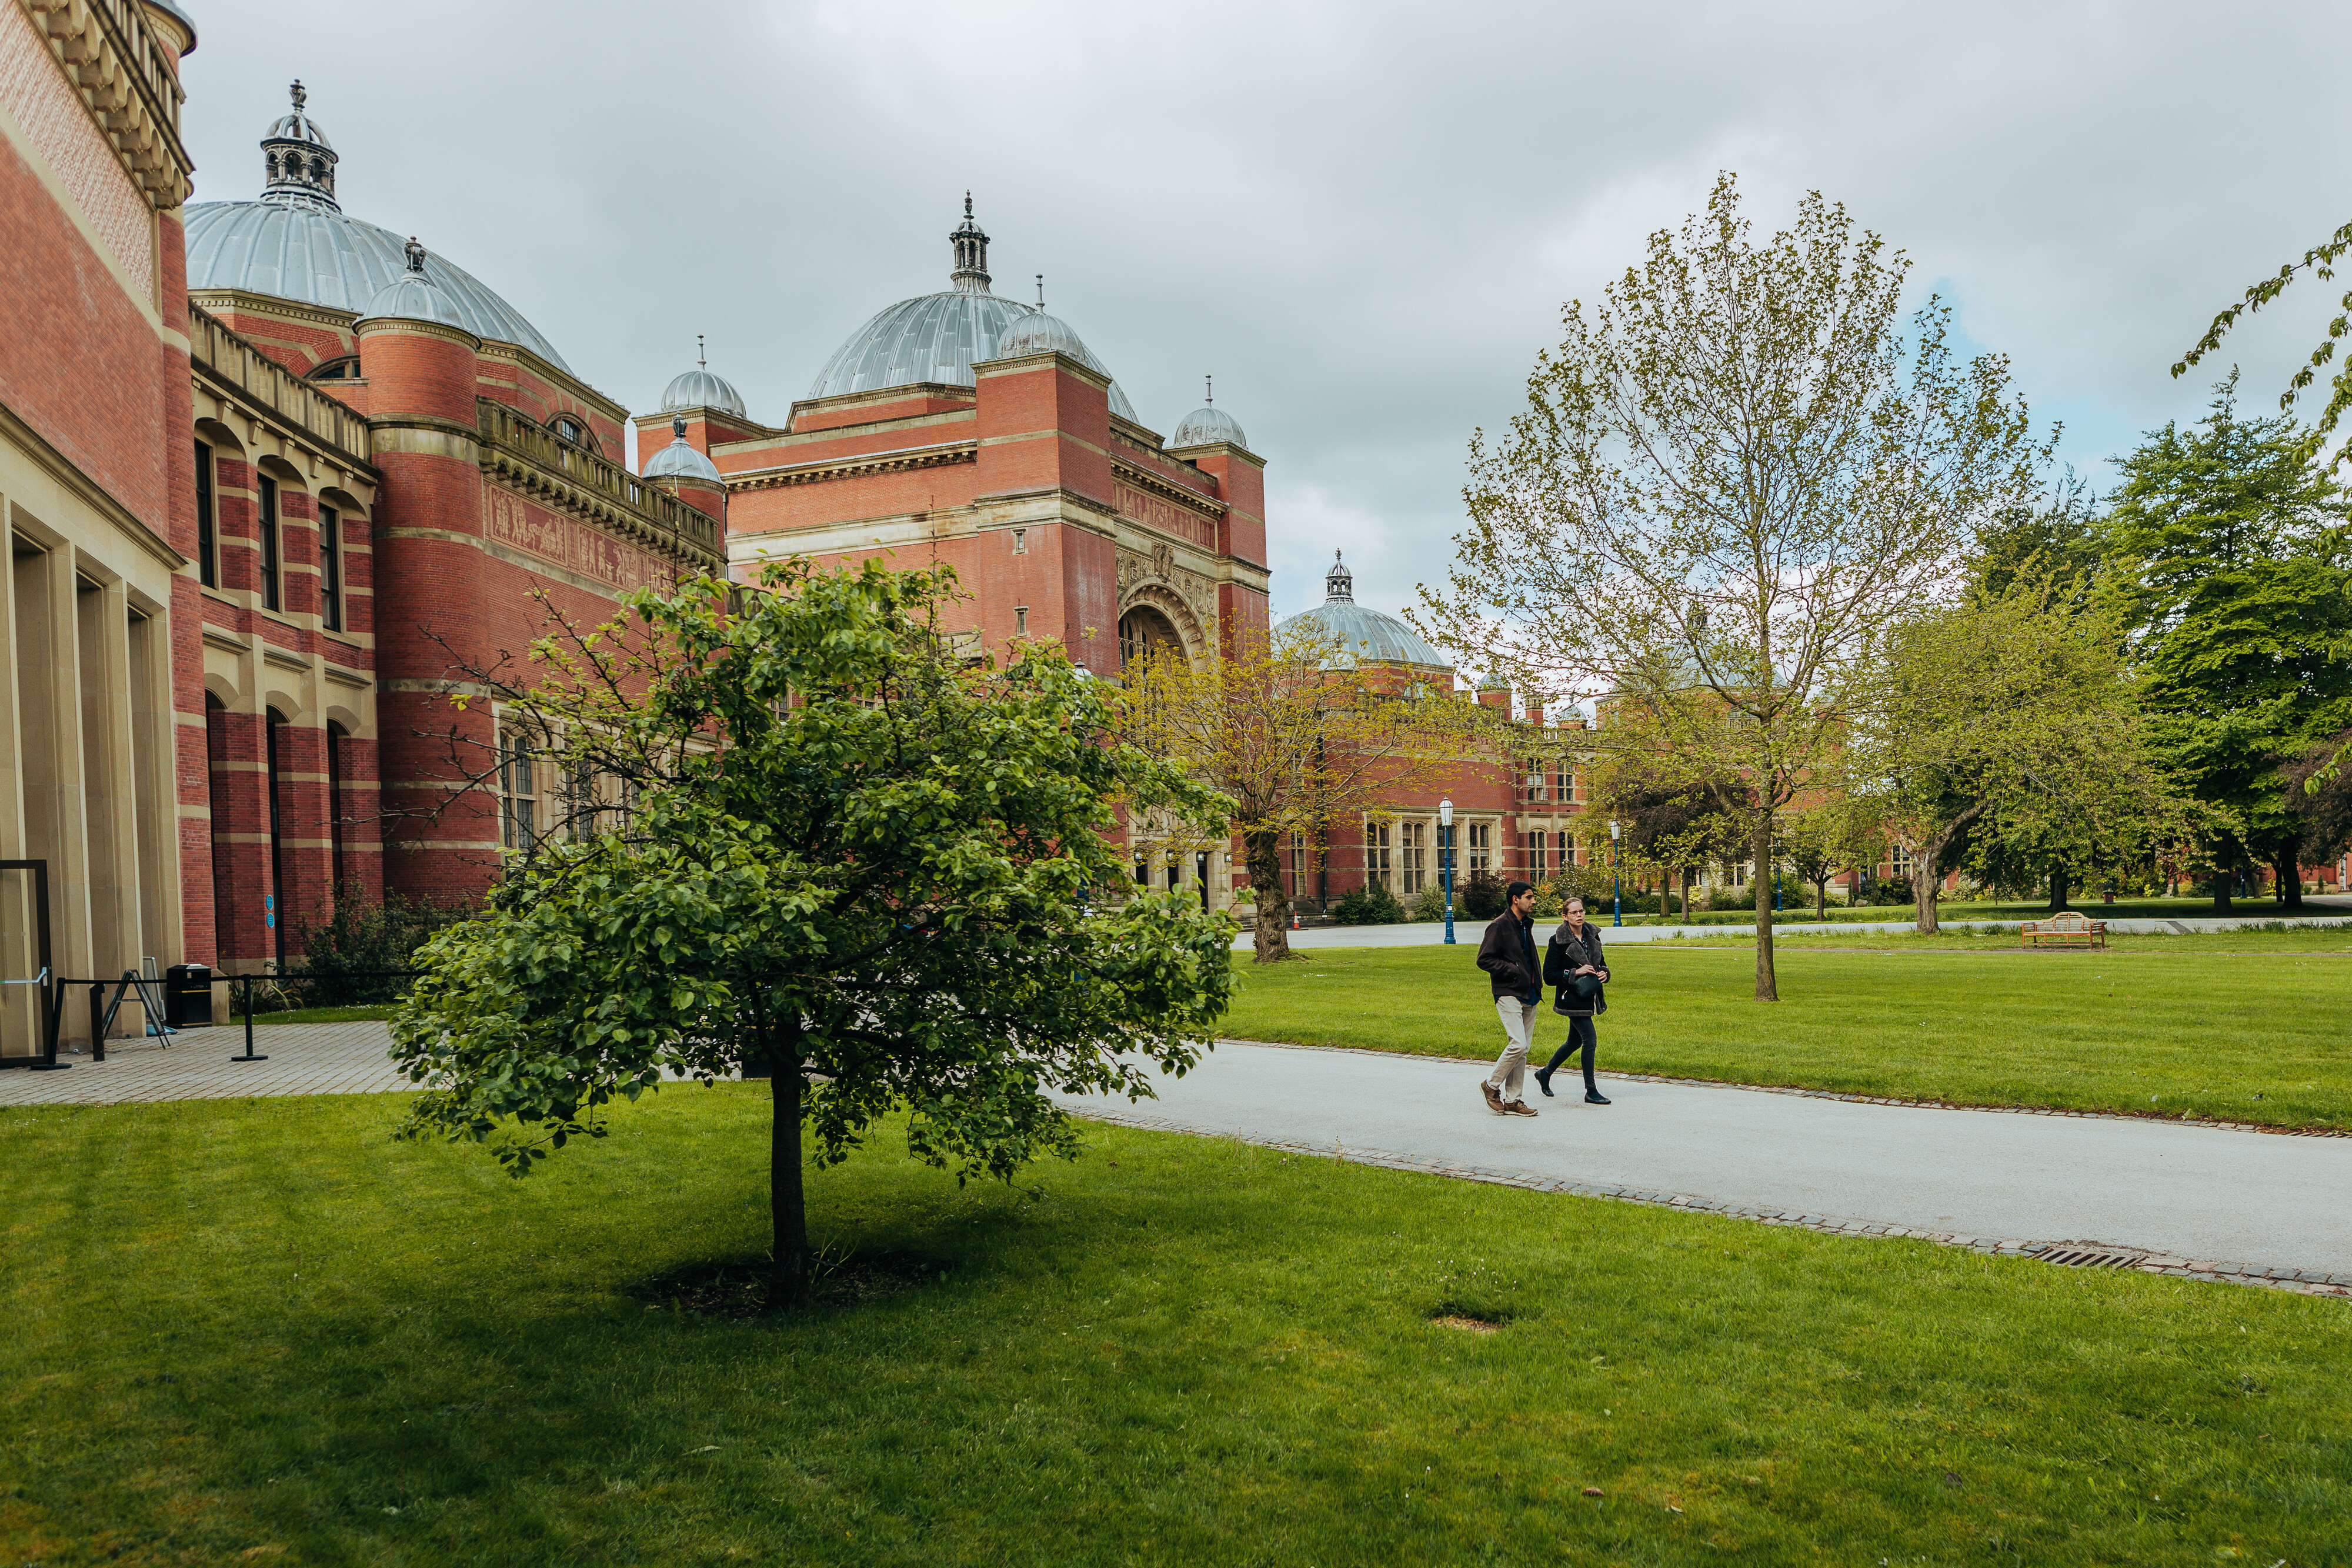 Two students walking in front of Aston Webb